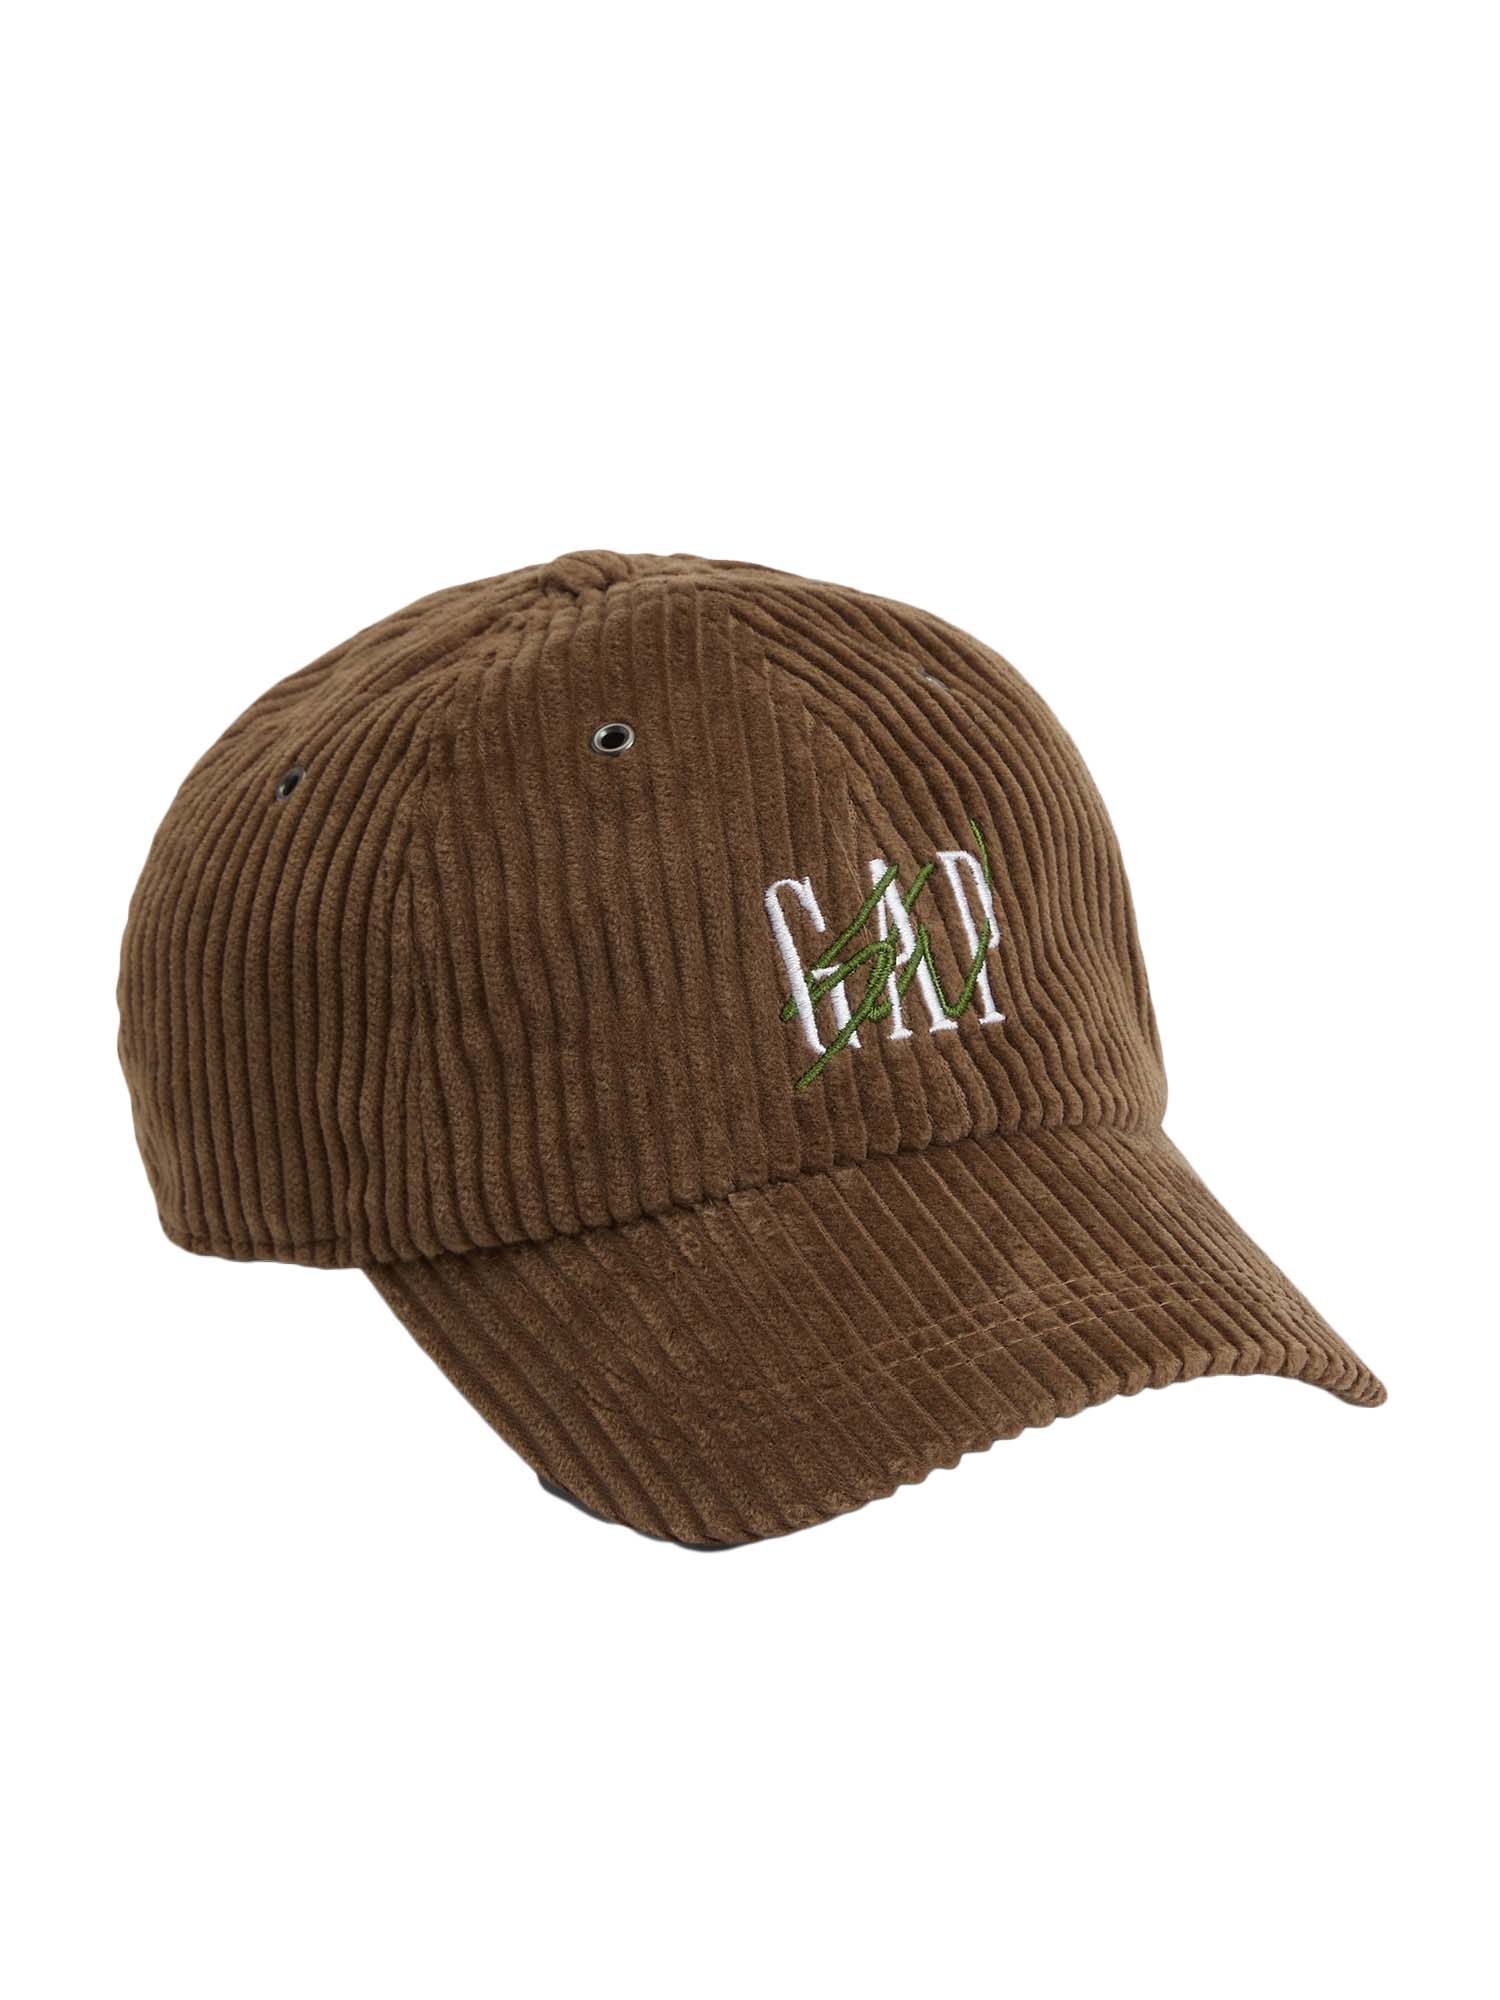 Gap Re Issue × Sean Wotherspoon Corduroy Logo Baseball Hat